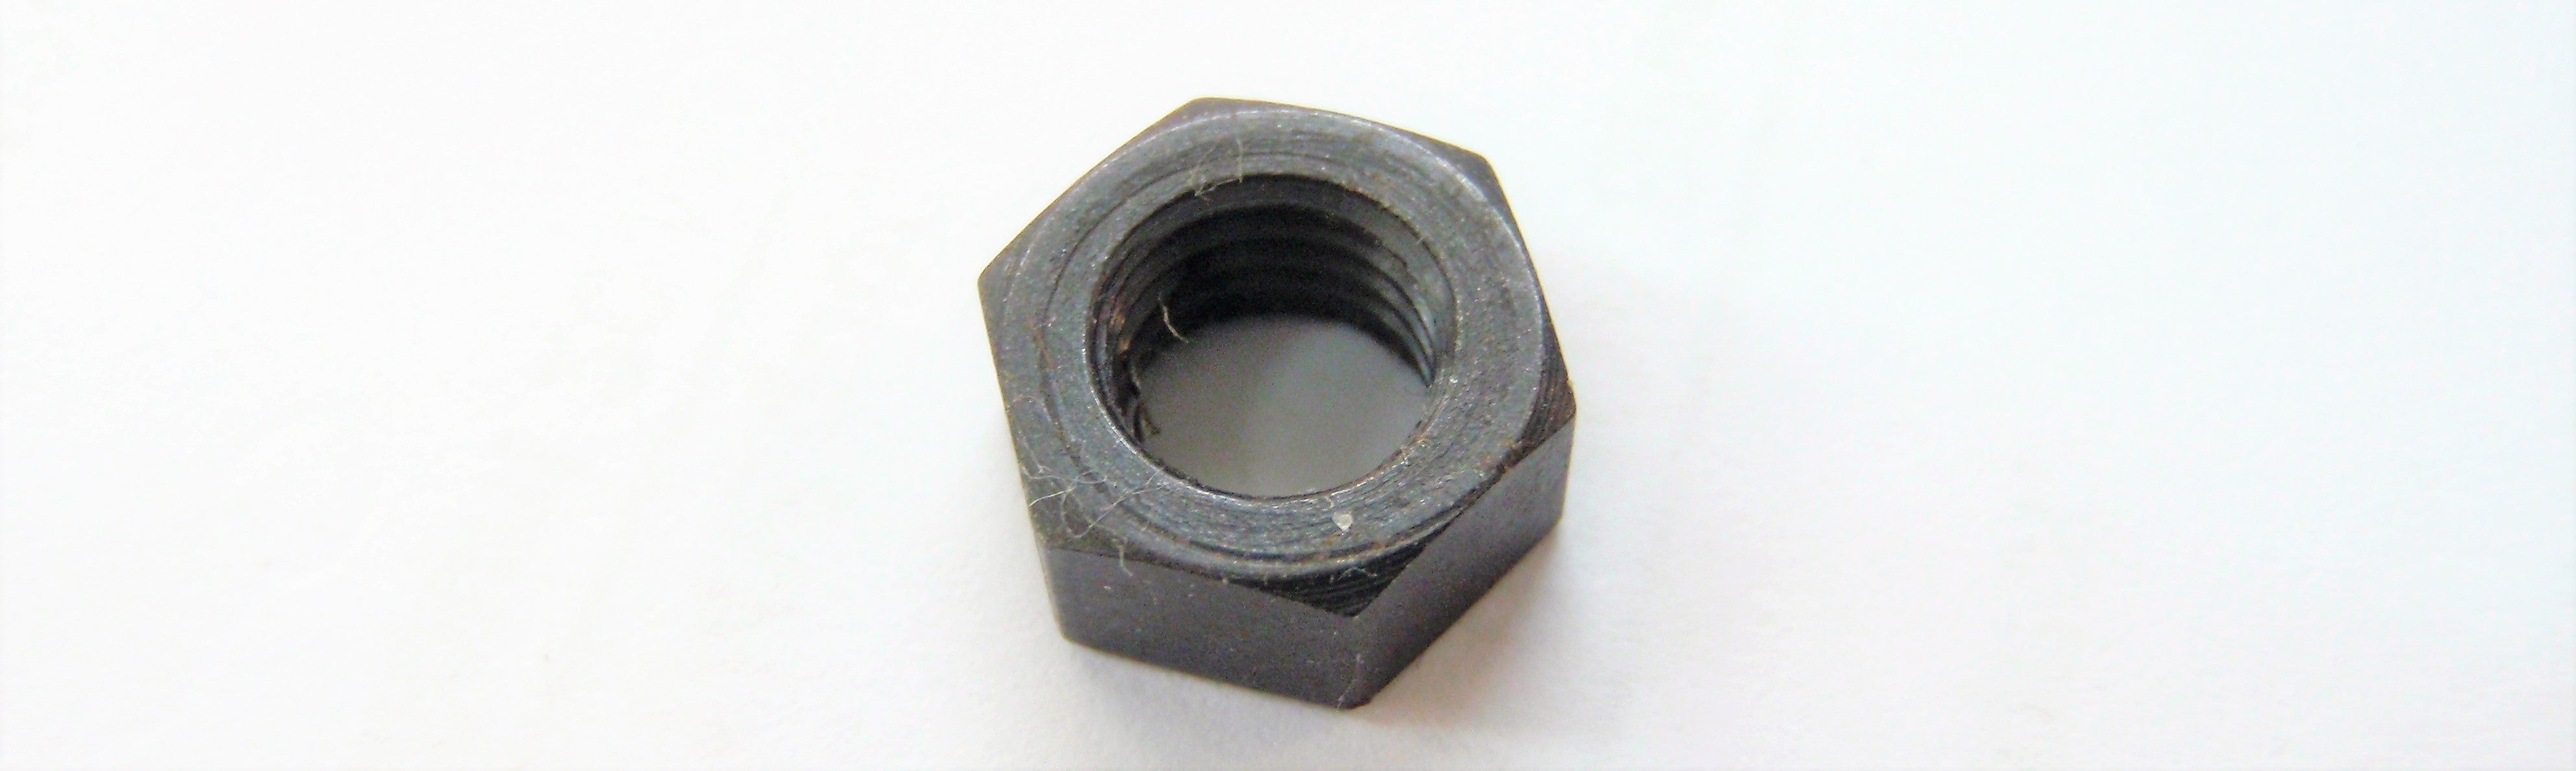 Simplex Master Decapping Rod Lock Nut Large (SPART1824)